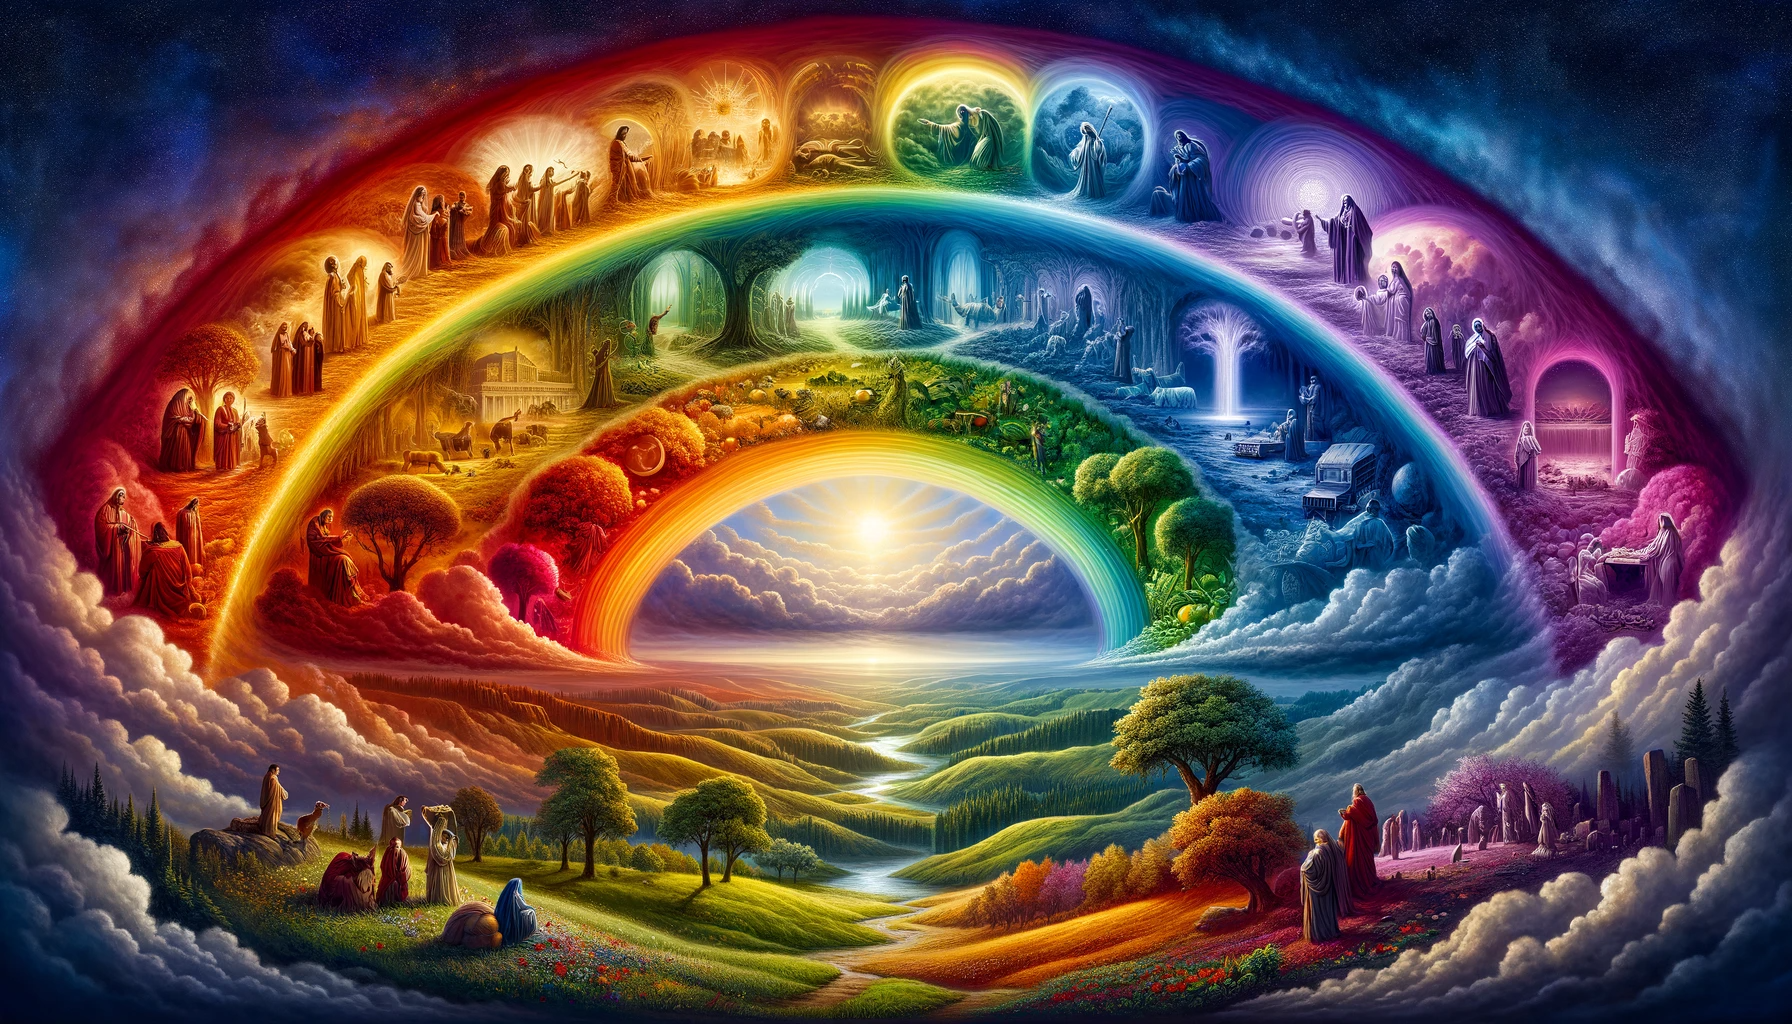 Spiritual Palette: The Meaning of Rainbow Colors in the Bible